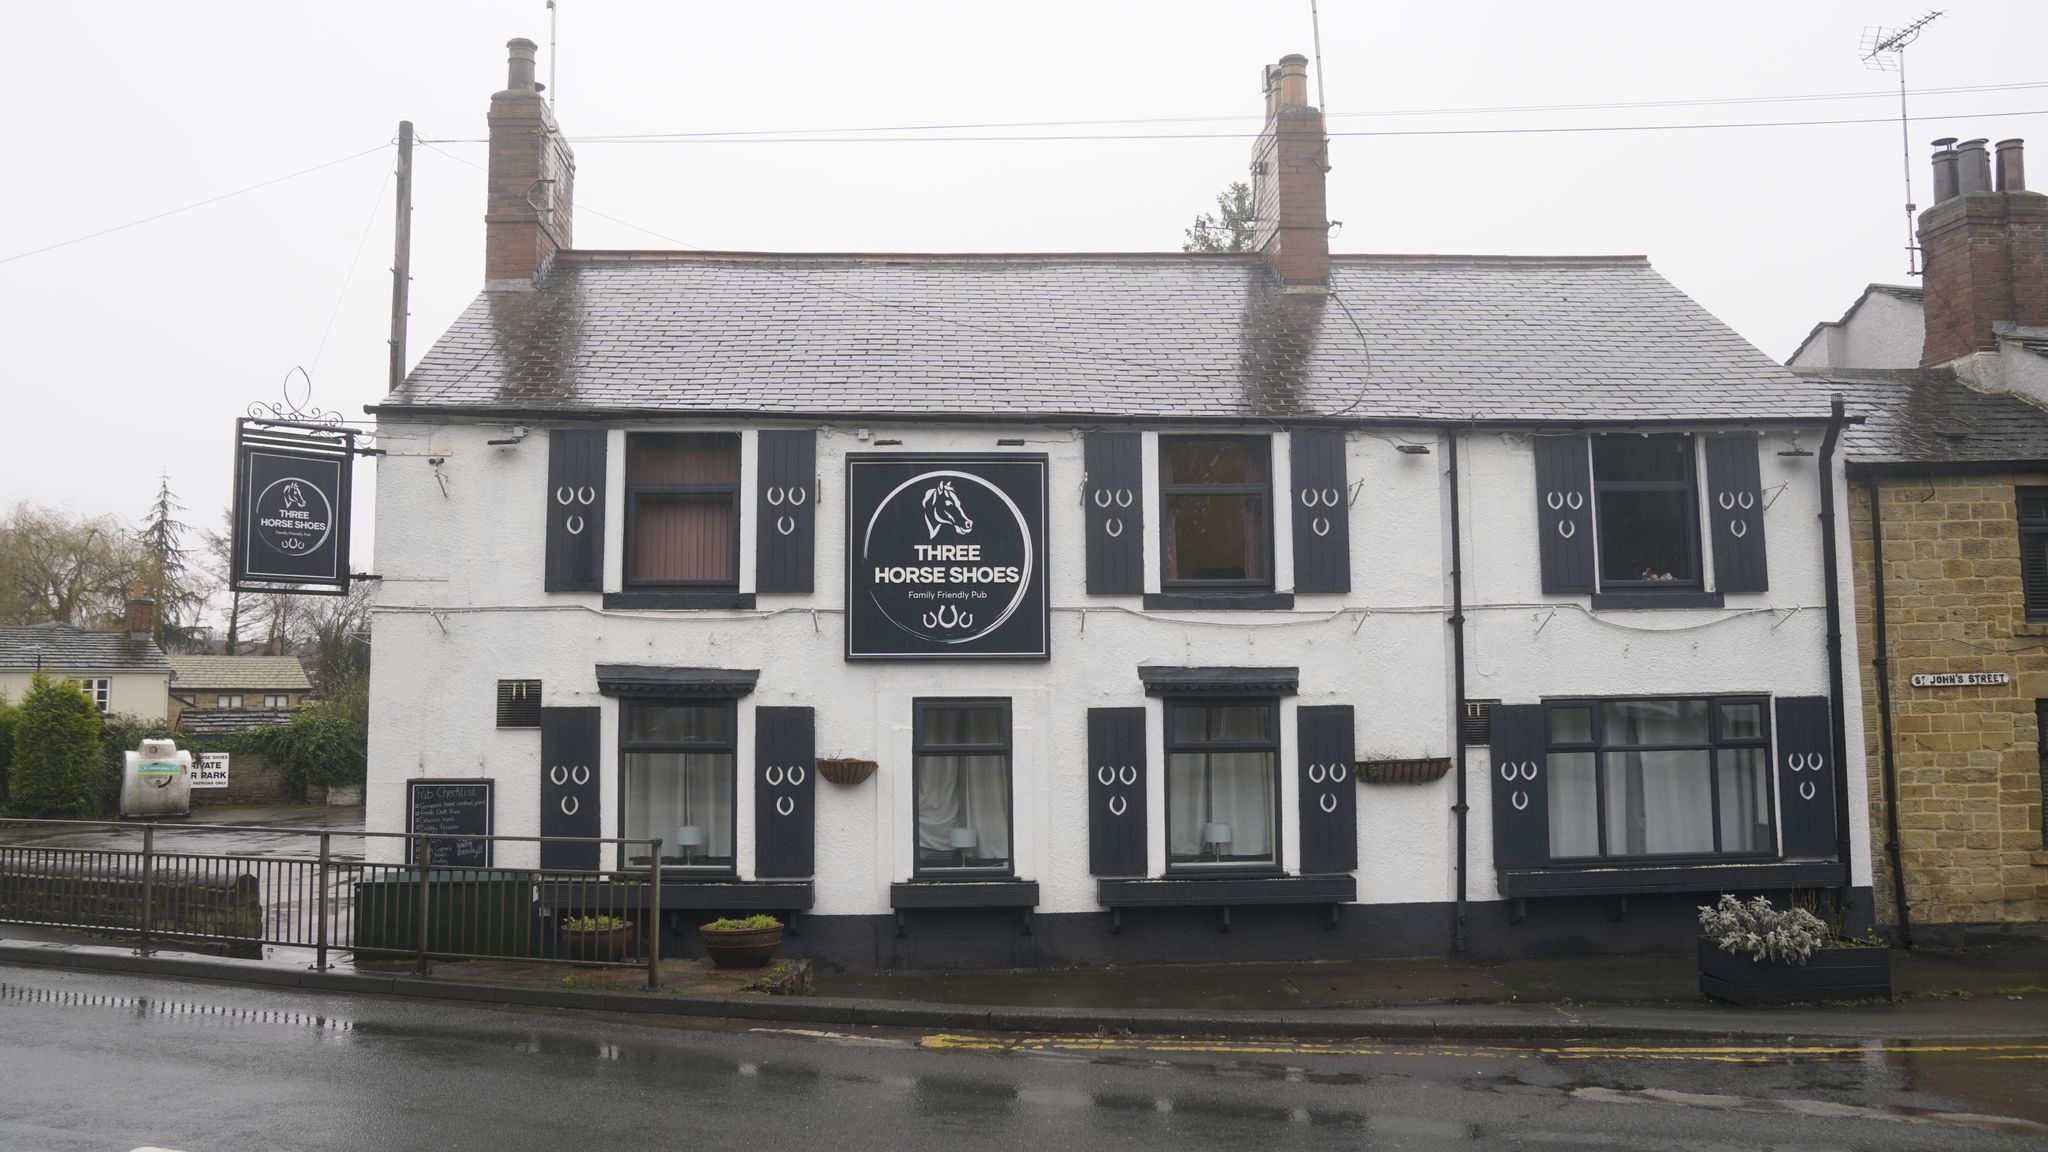 Mother of newborn baby found dead in Leeds pub toilet identified, police say